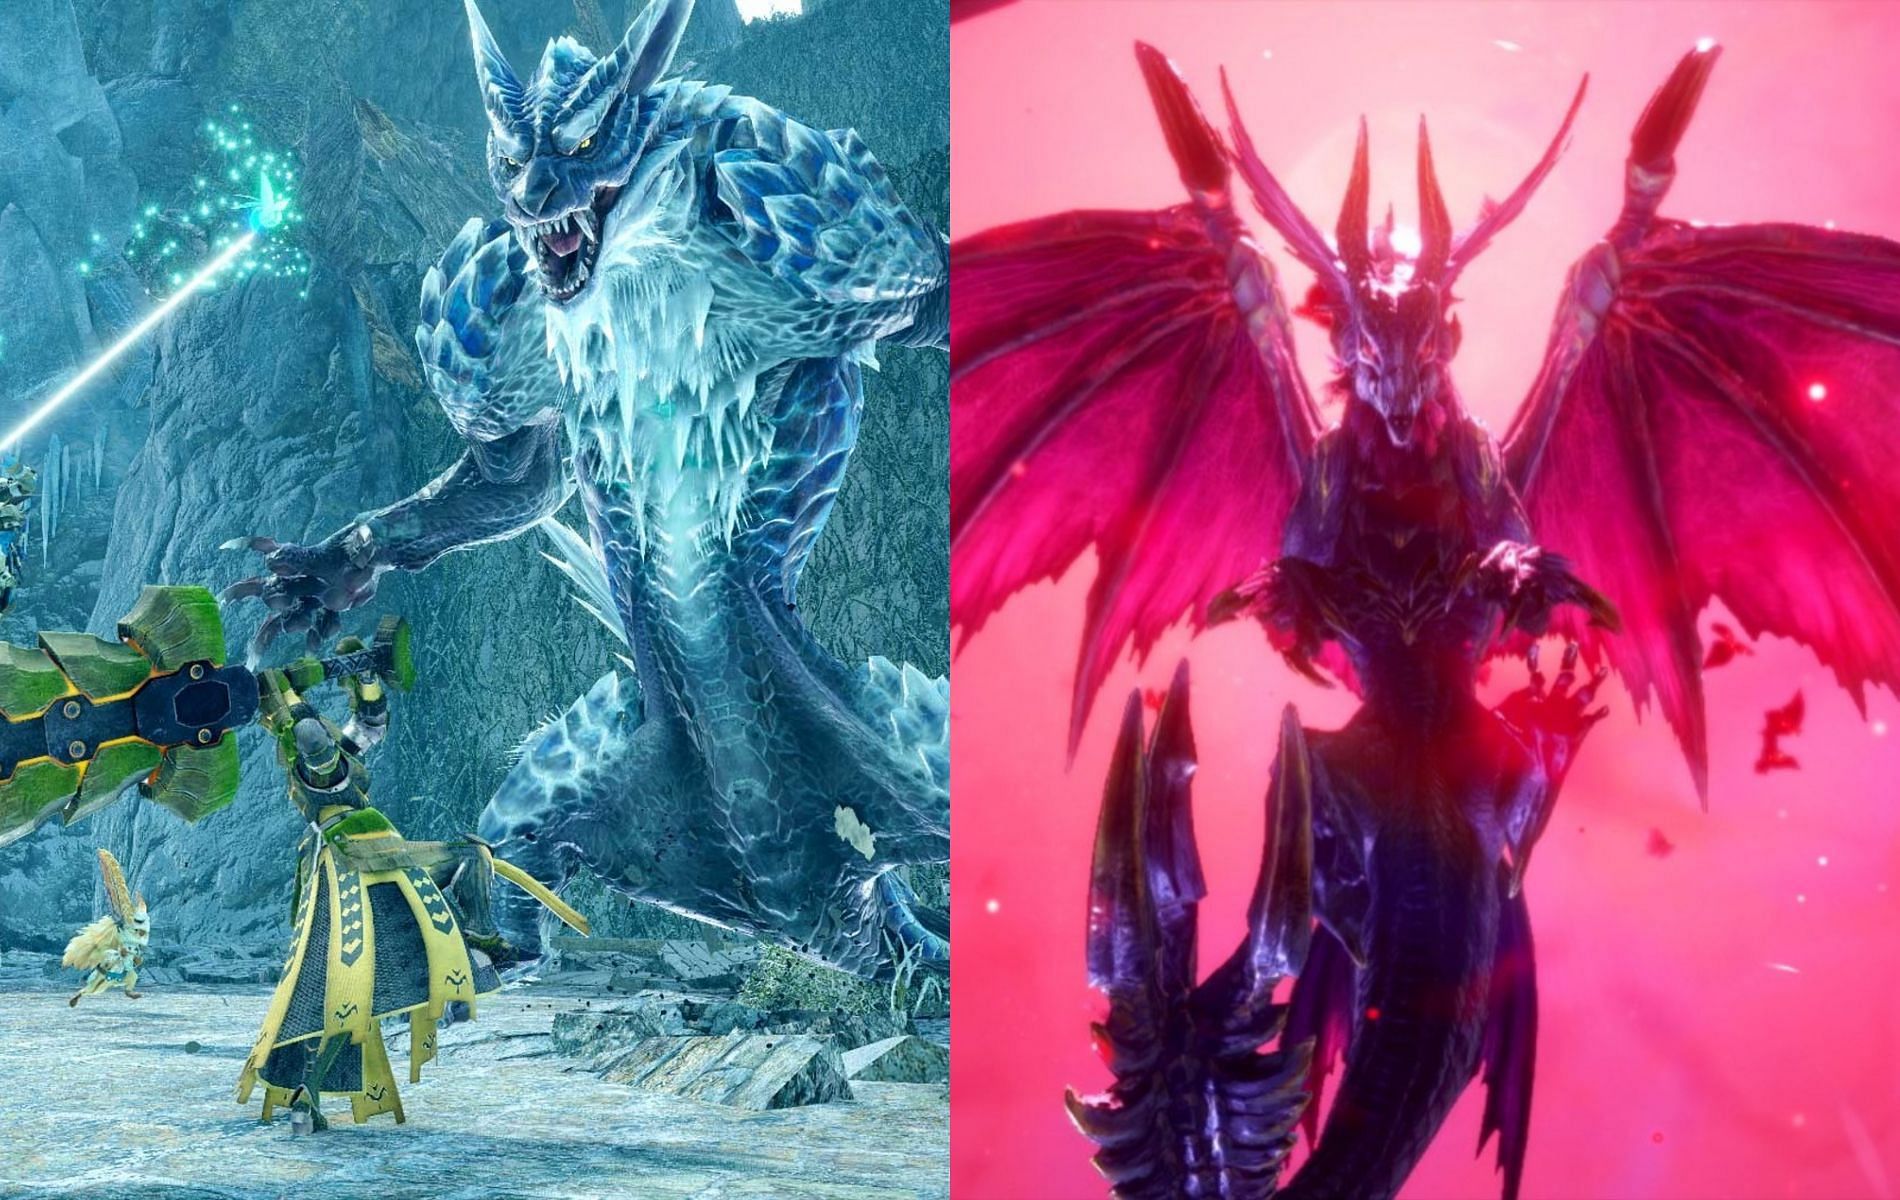 What could this new Monster Hunter entry be about? (Images via Capcom)